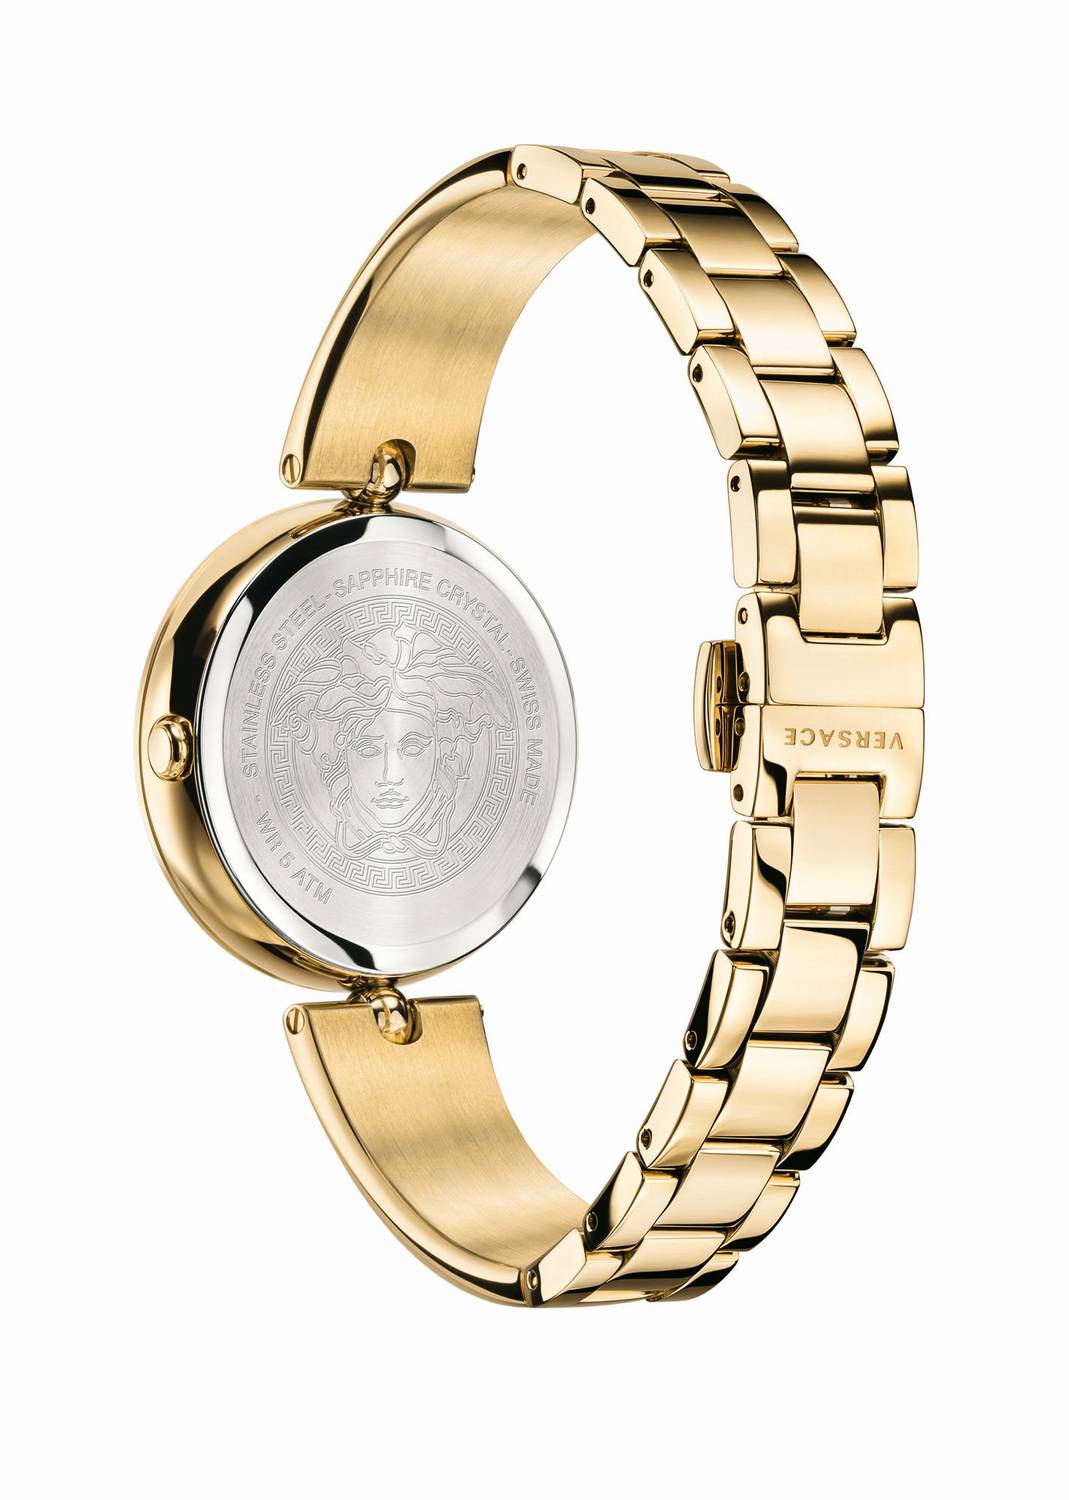 Versace Ladies Watch Palazzo Empire 39mm Gold Band VECO03222